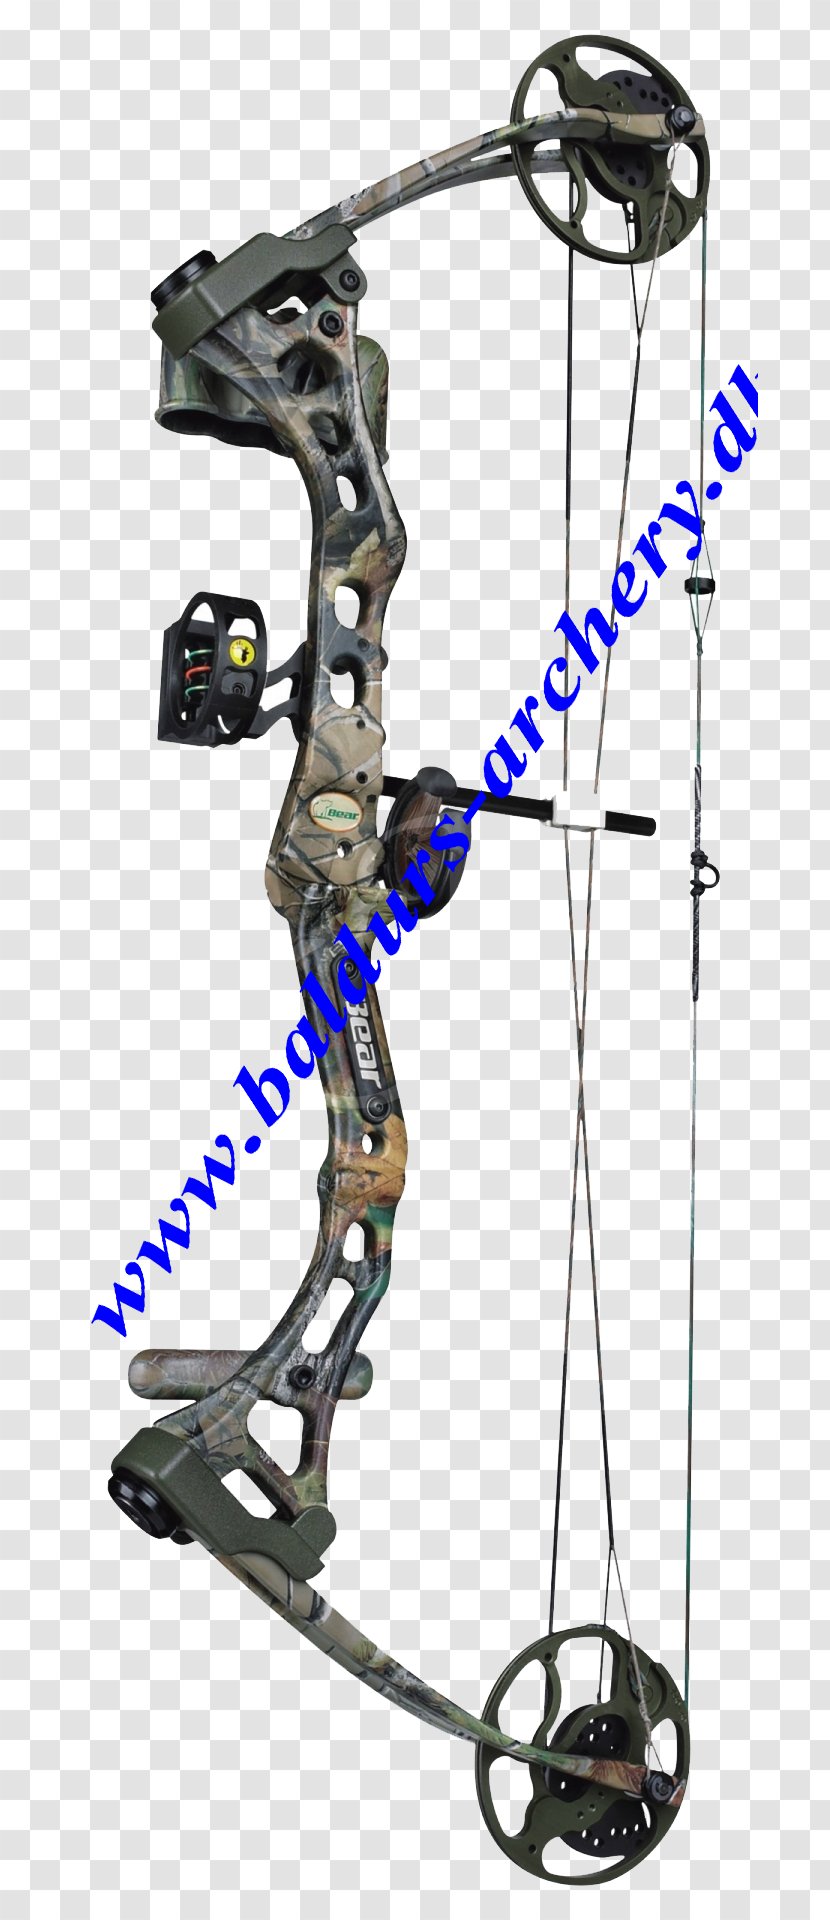 Compound Bows Sports Archery Bear - Bow And Arrow Transparent PNG